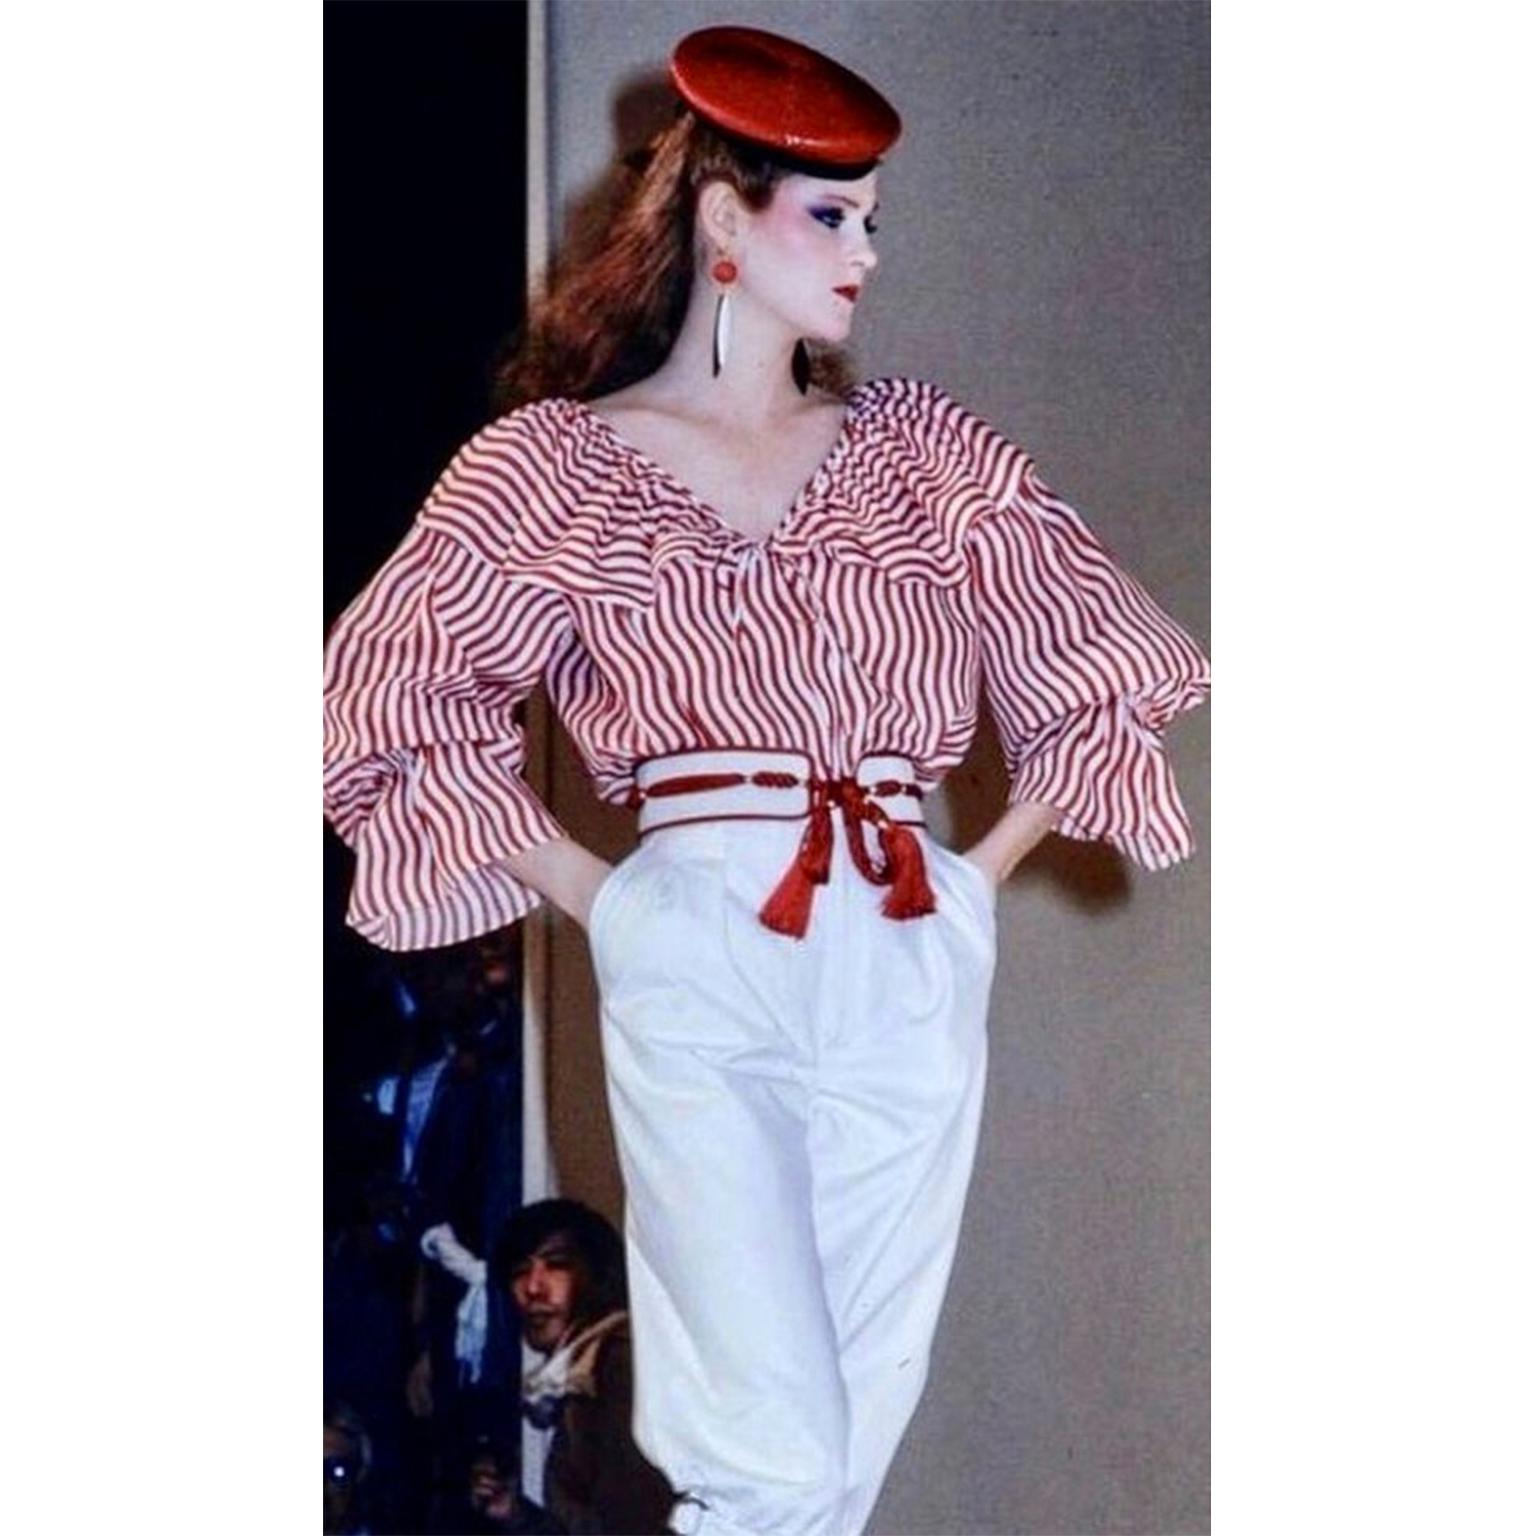 This is a dramatic vintage blouse from the Yves Saint Laurent Spring/Summer 1980 collection! Yves Saint Laurent designed beautiful blouses and this one can be worn with many things you already own! This top was featured on the runway and we love